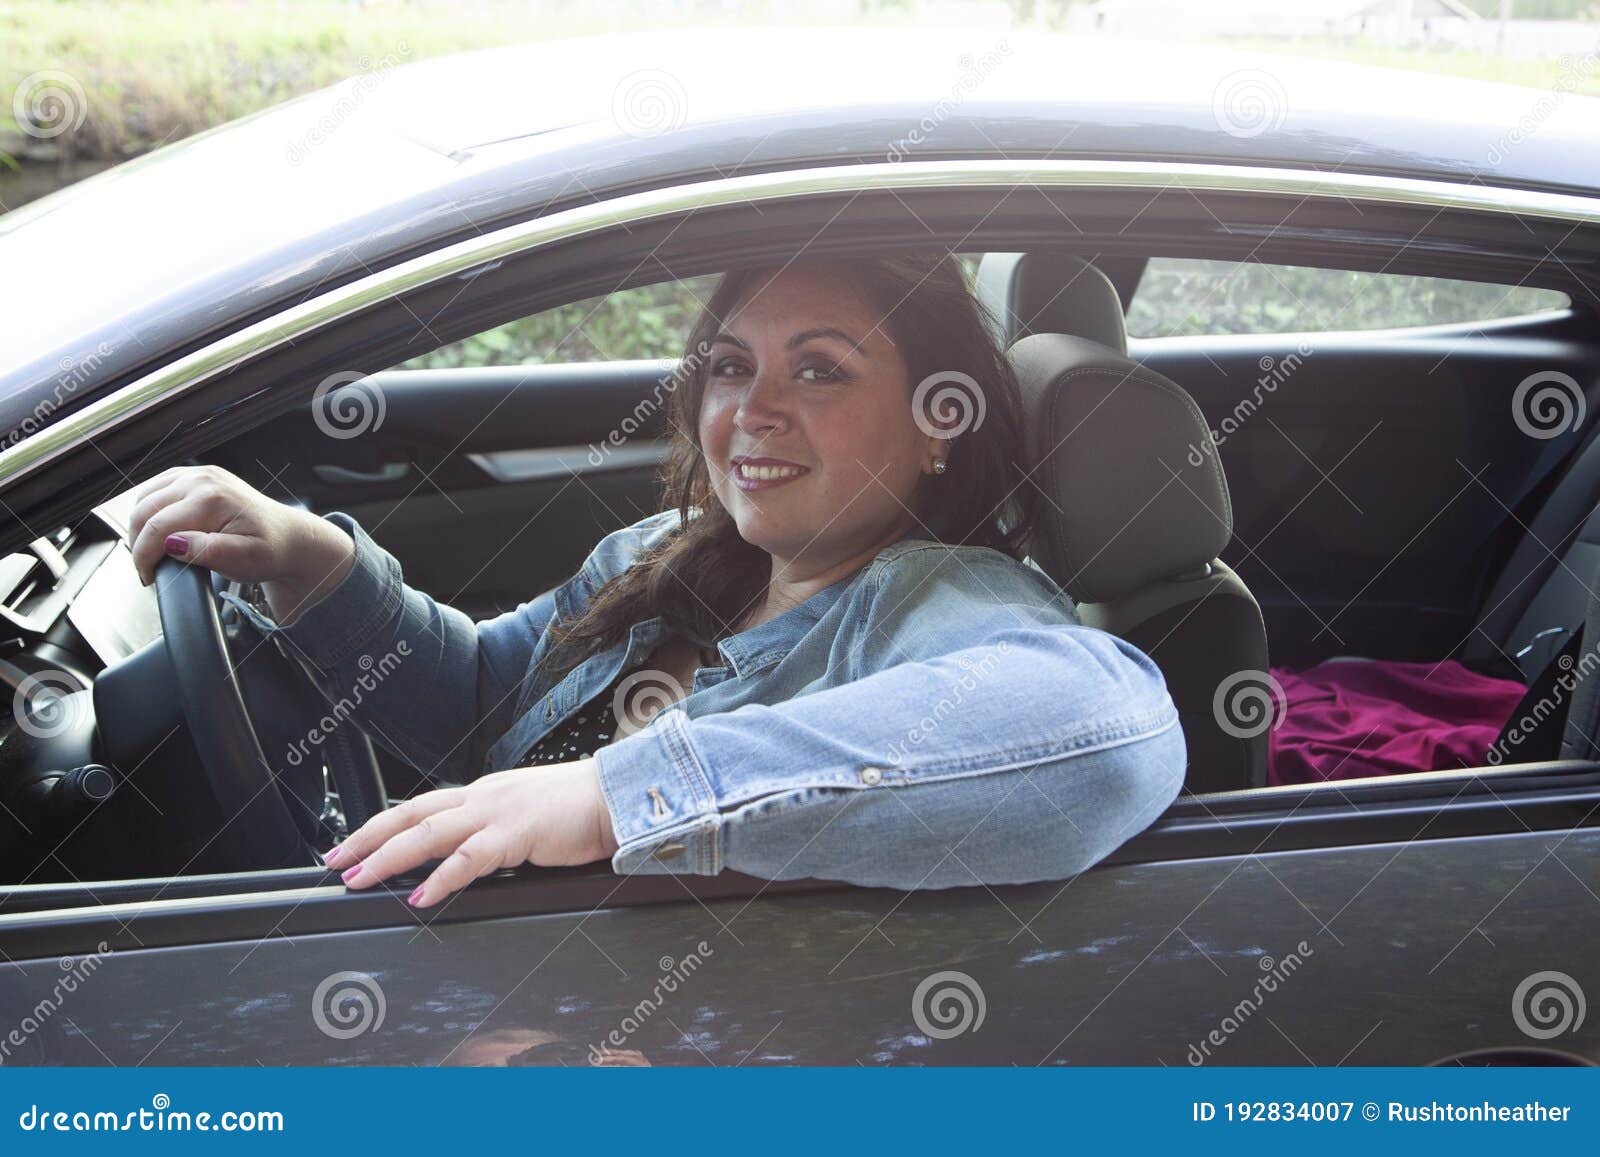 Gorgeous Latina Woman Looking Relaxed in Her Car Stock Image - Image of ...